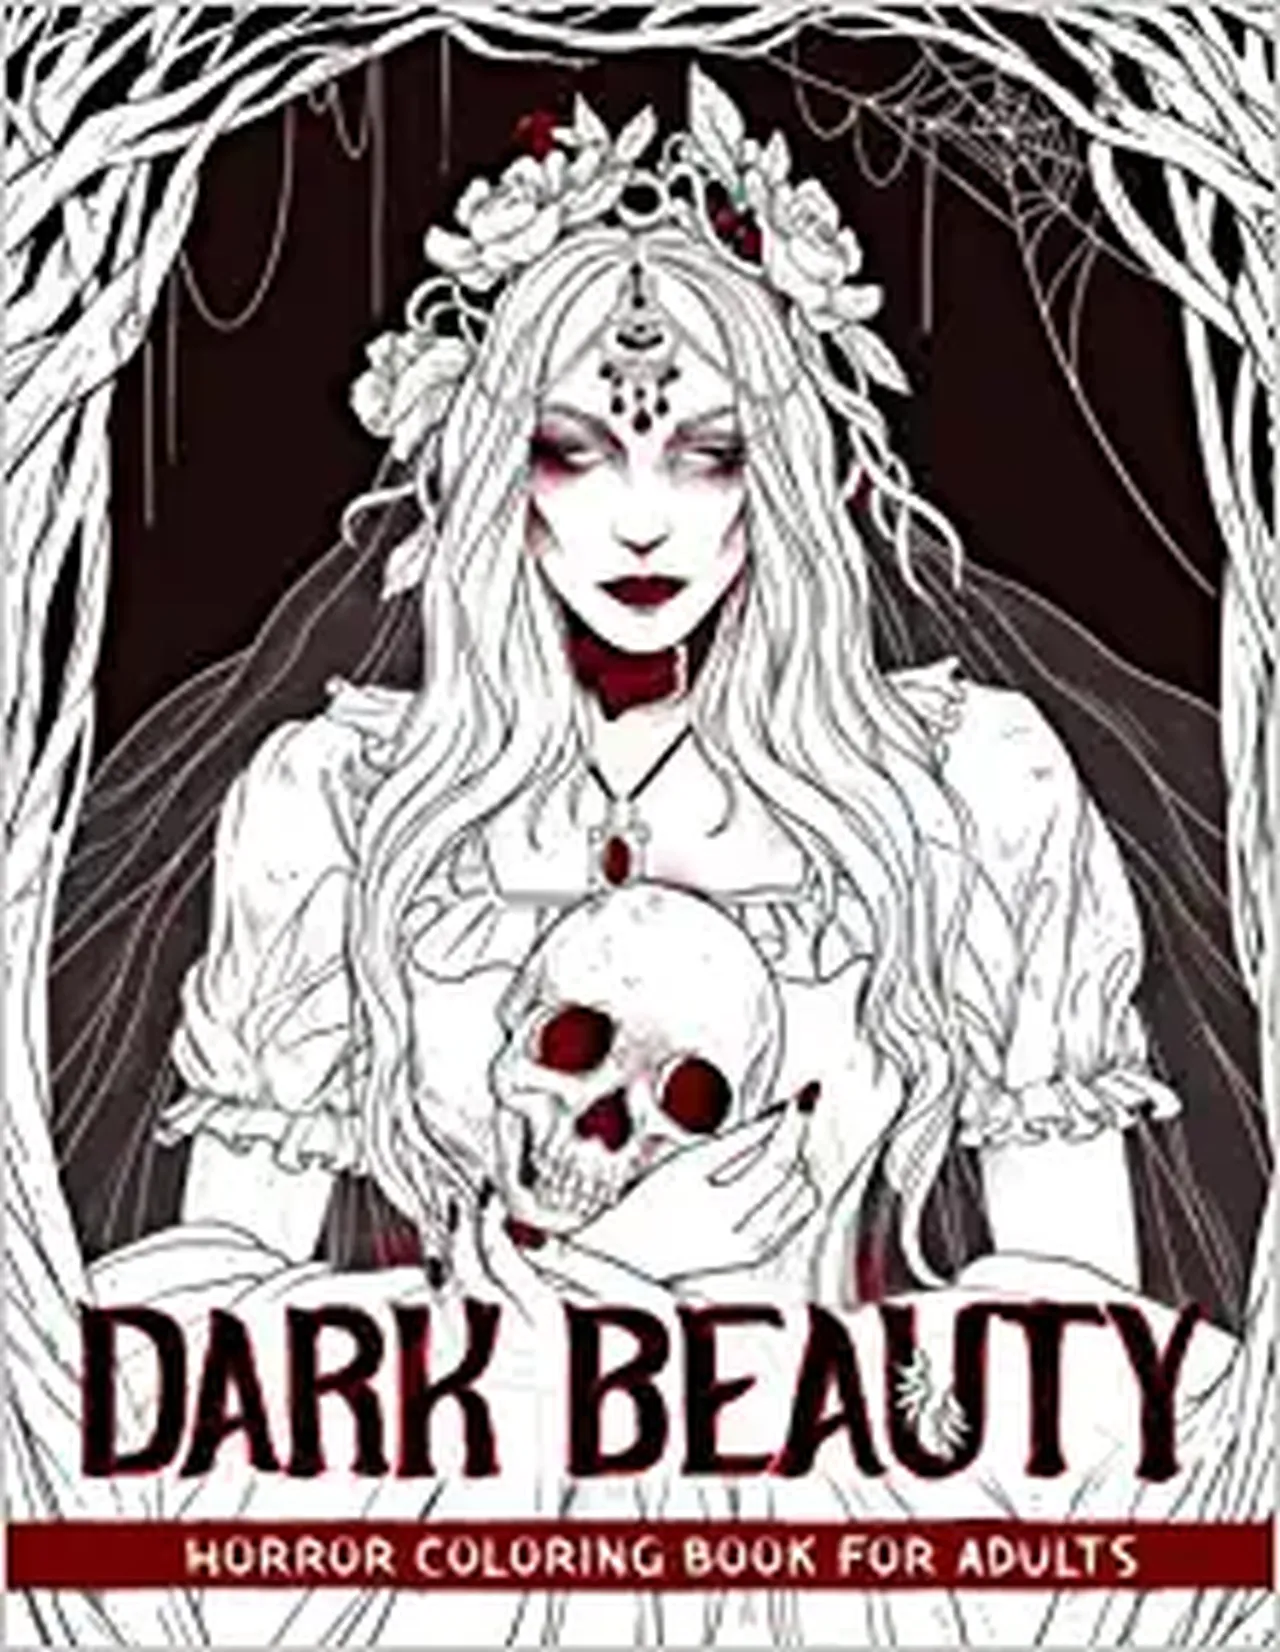 National coloring book day best horror fantasy relaxing adult coloring books